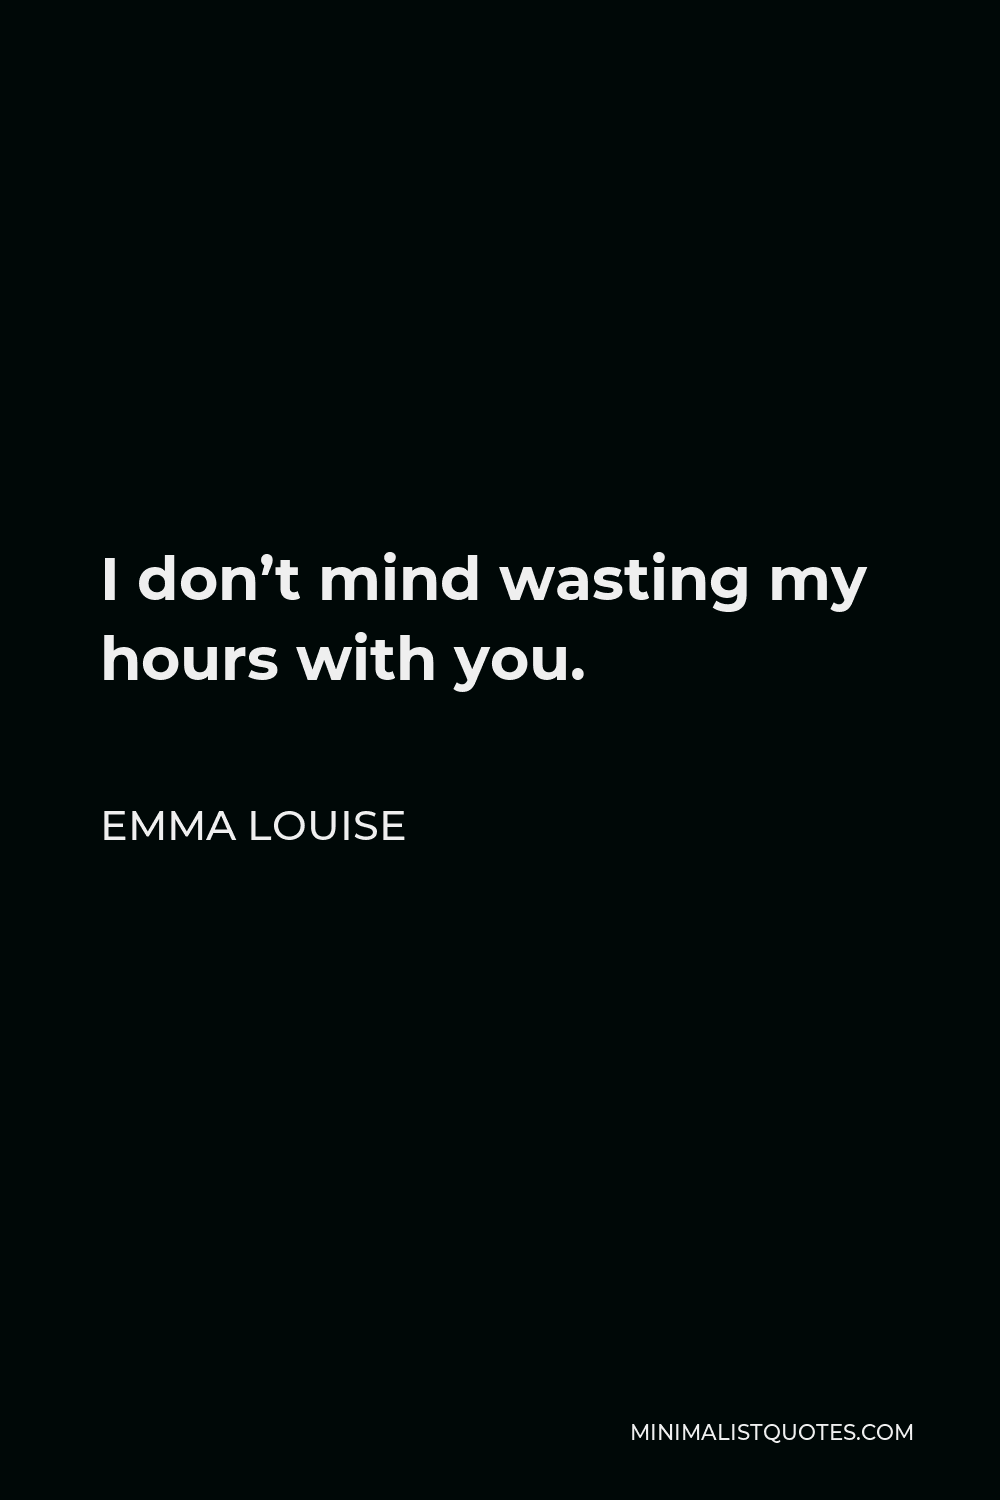 Emma Louise Quote - I don’t mind wasting my hours with you.